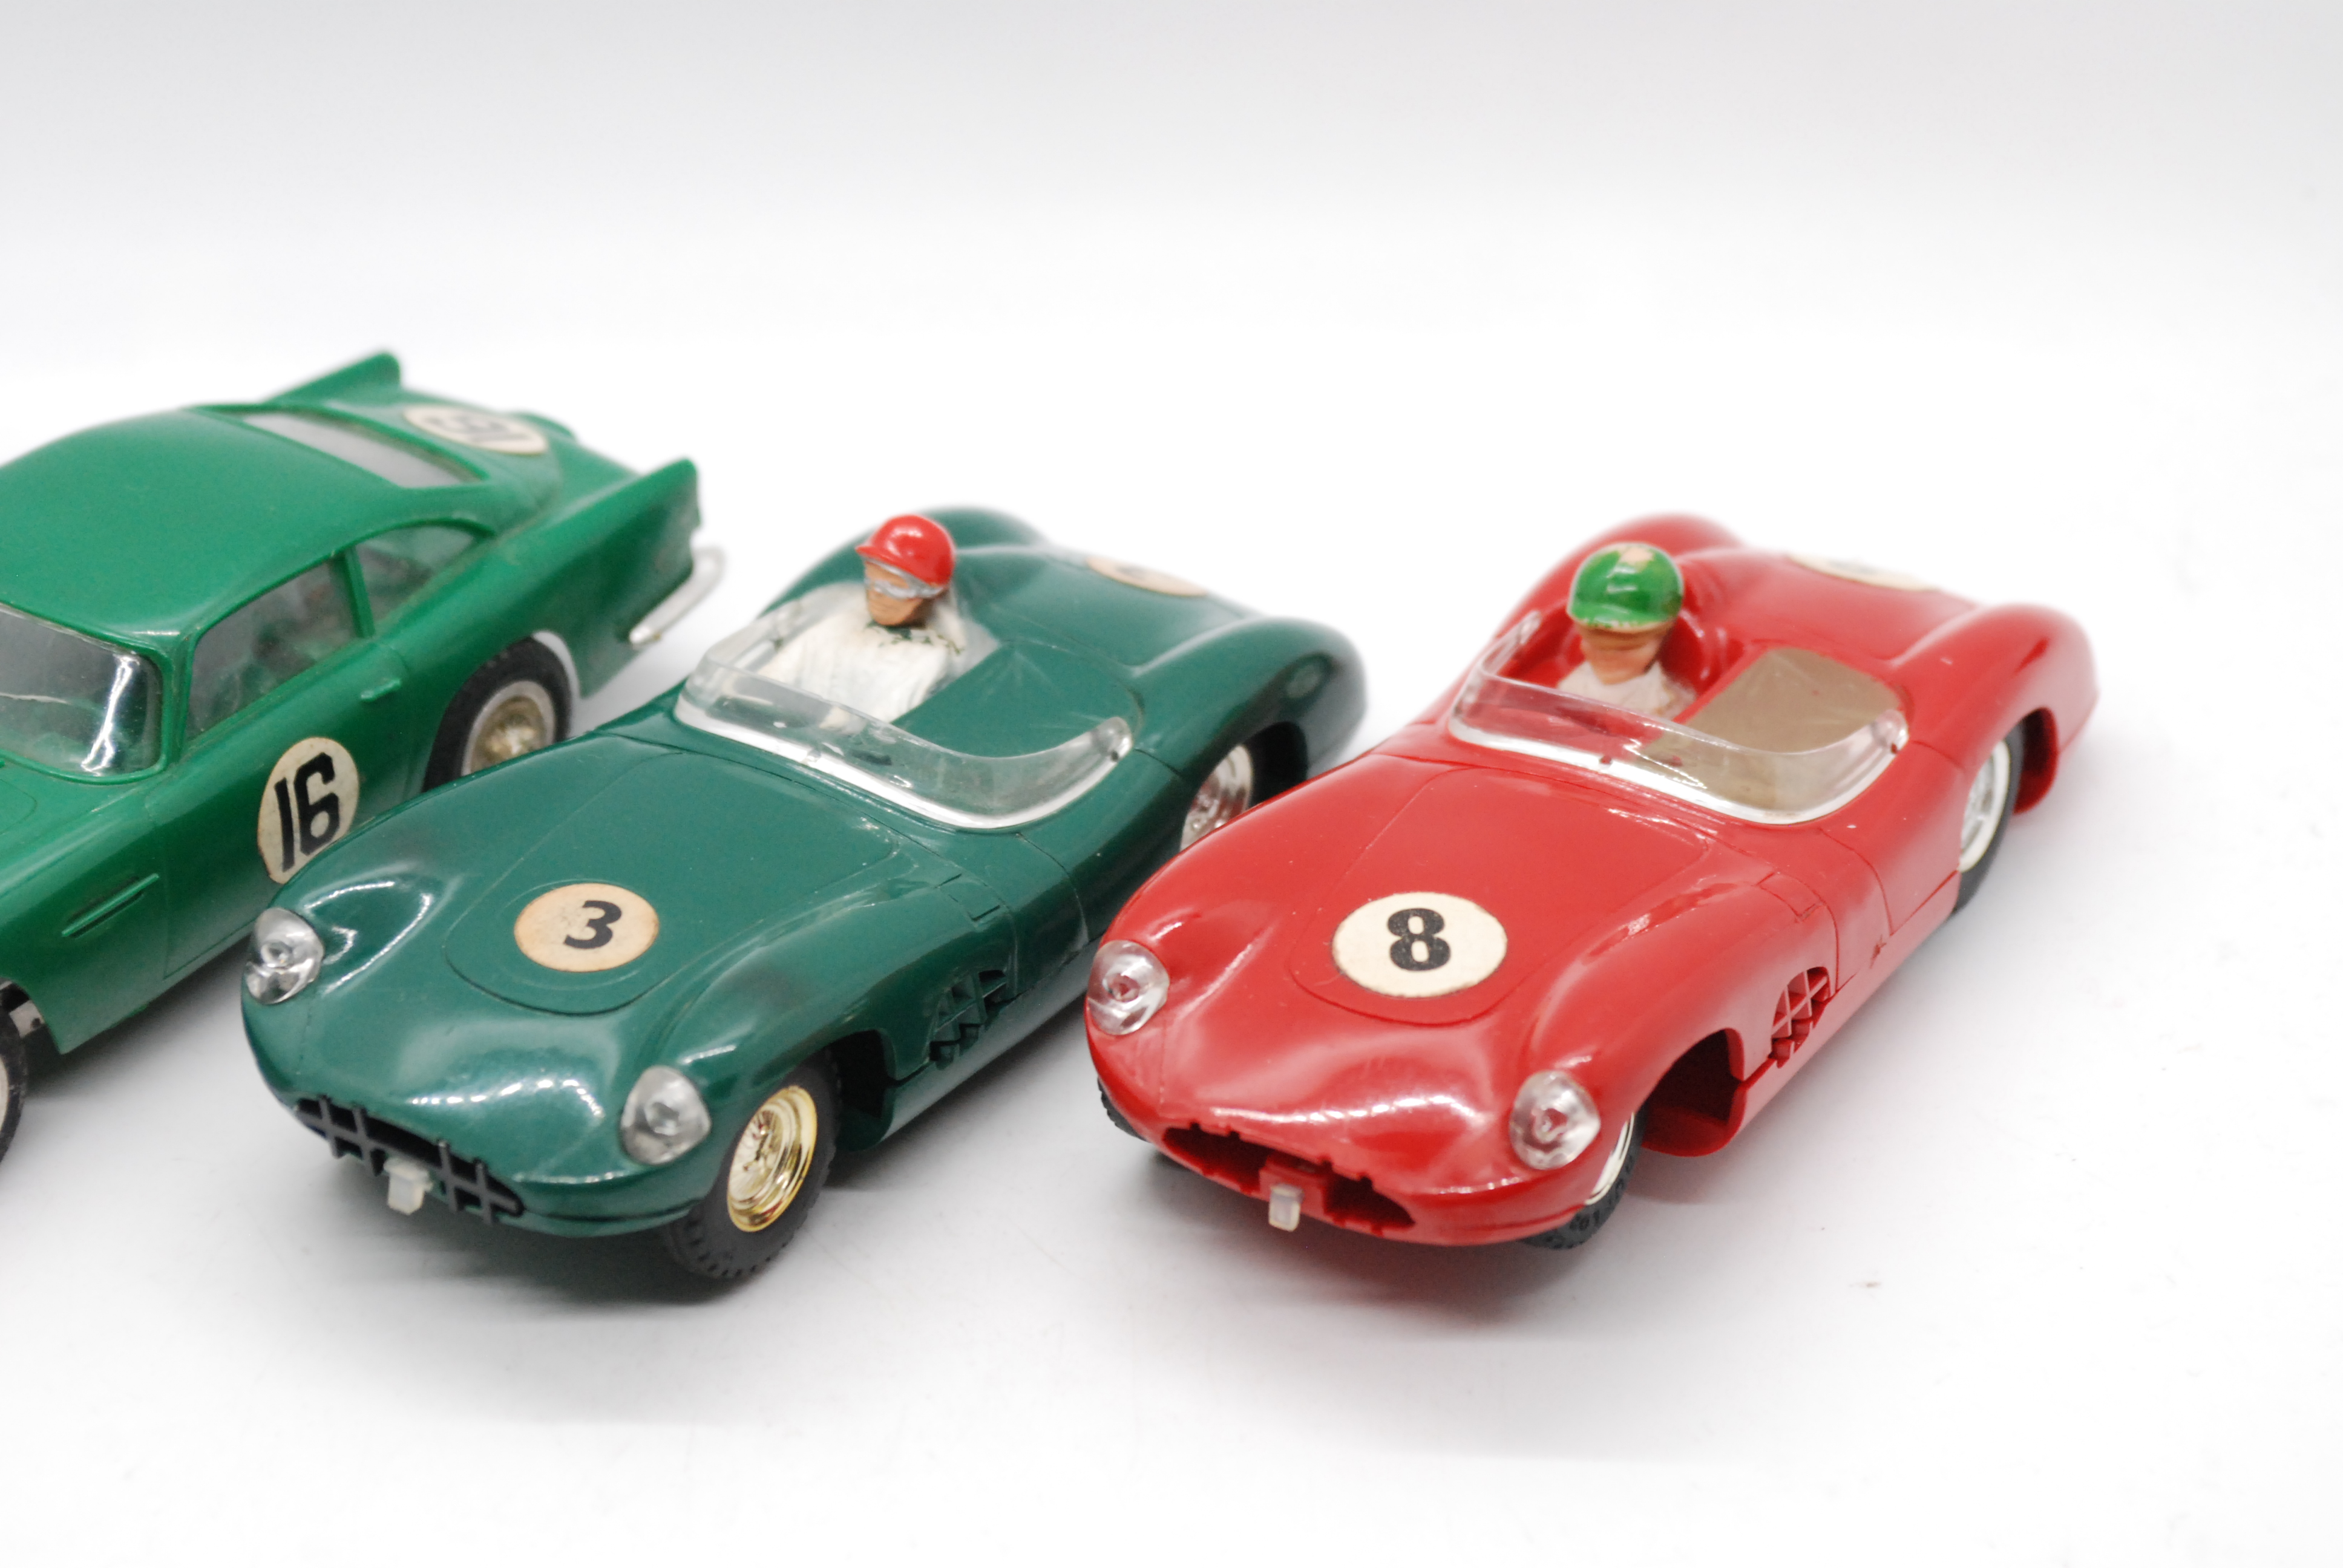 Scalextric, Revell - Three unboxed vintage Scalextric Aston Martin slot cars. - Image 3 of 7